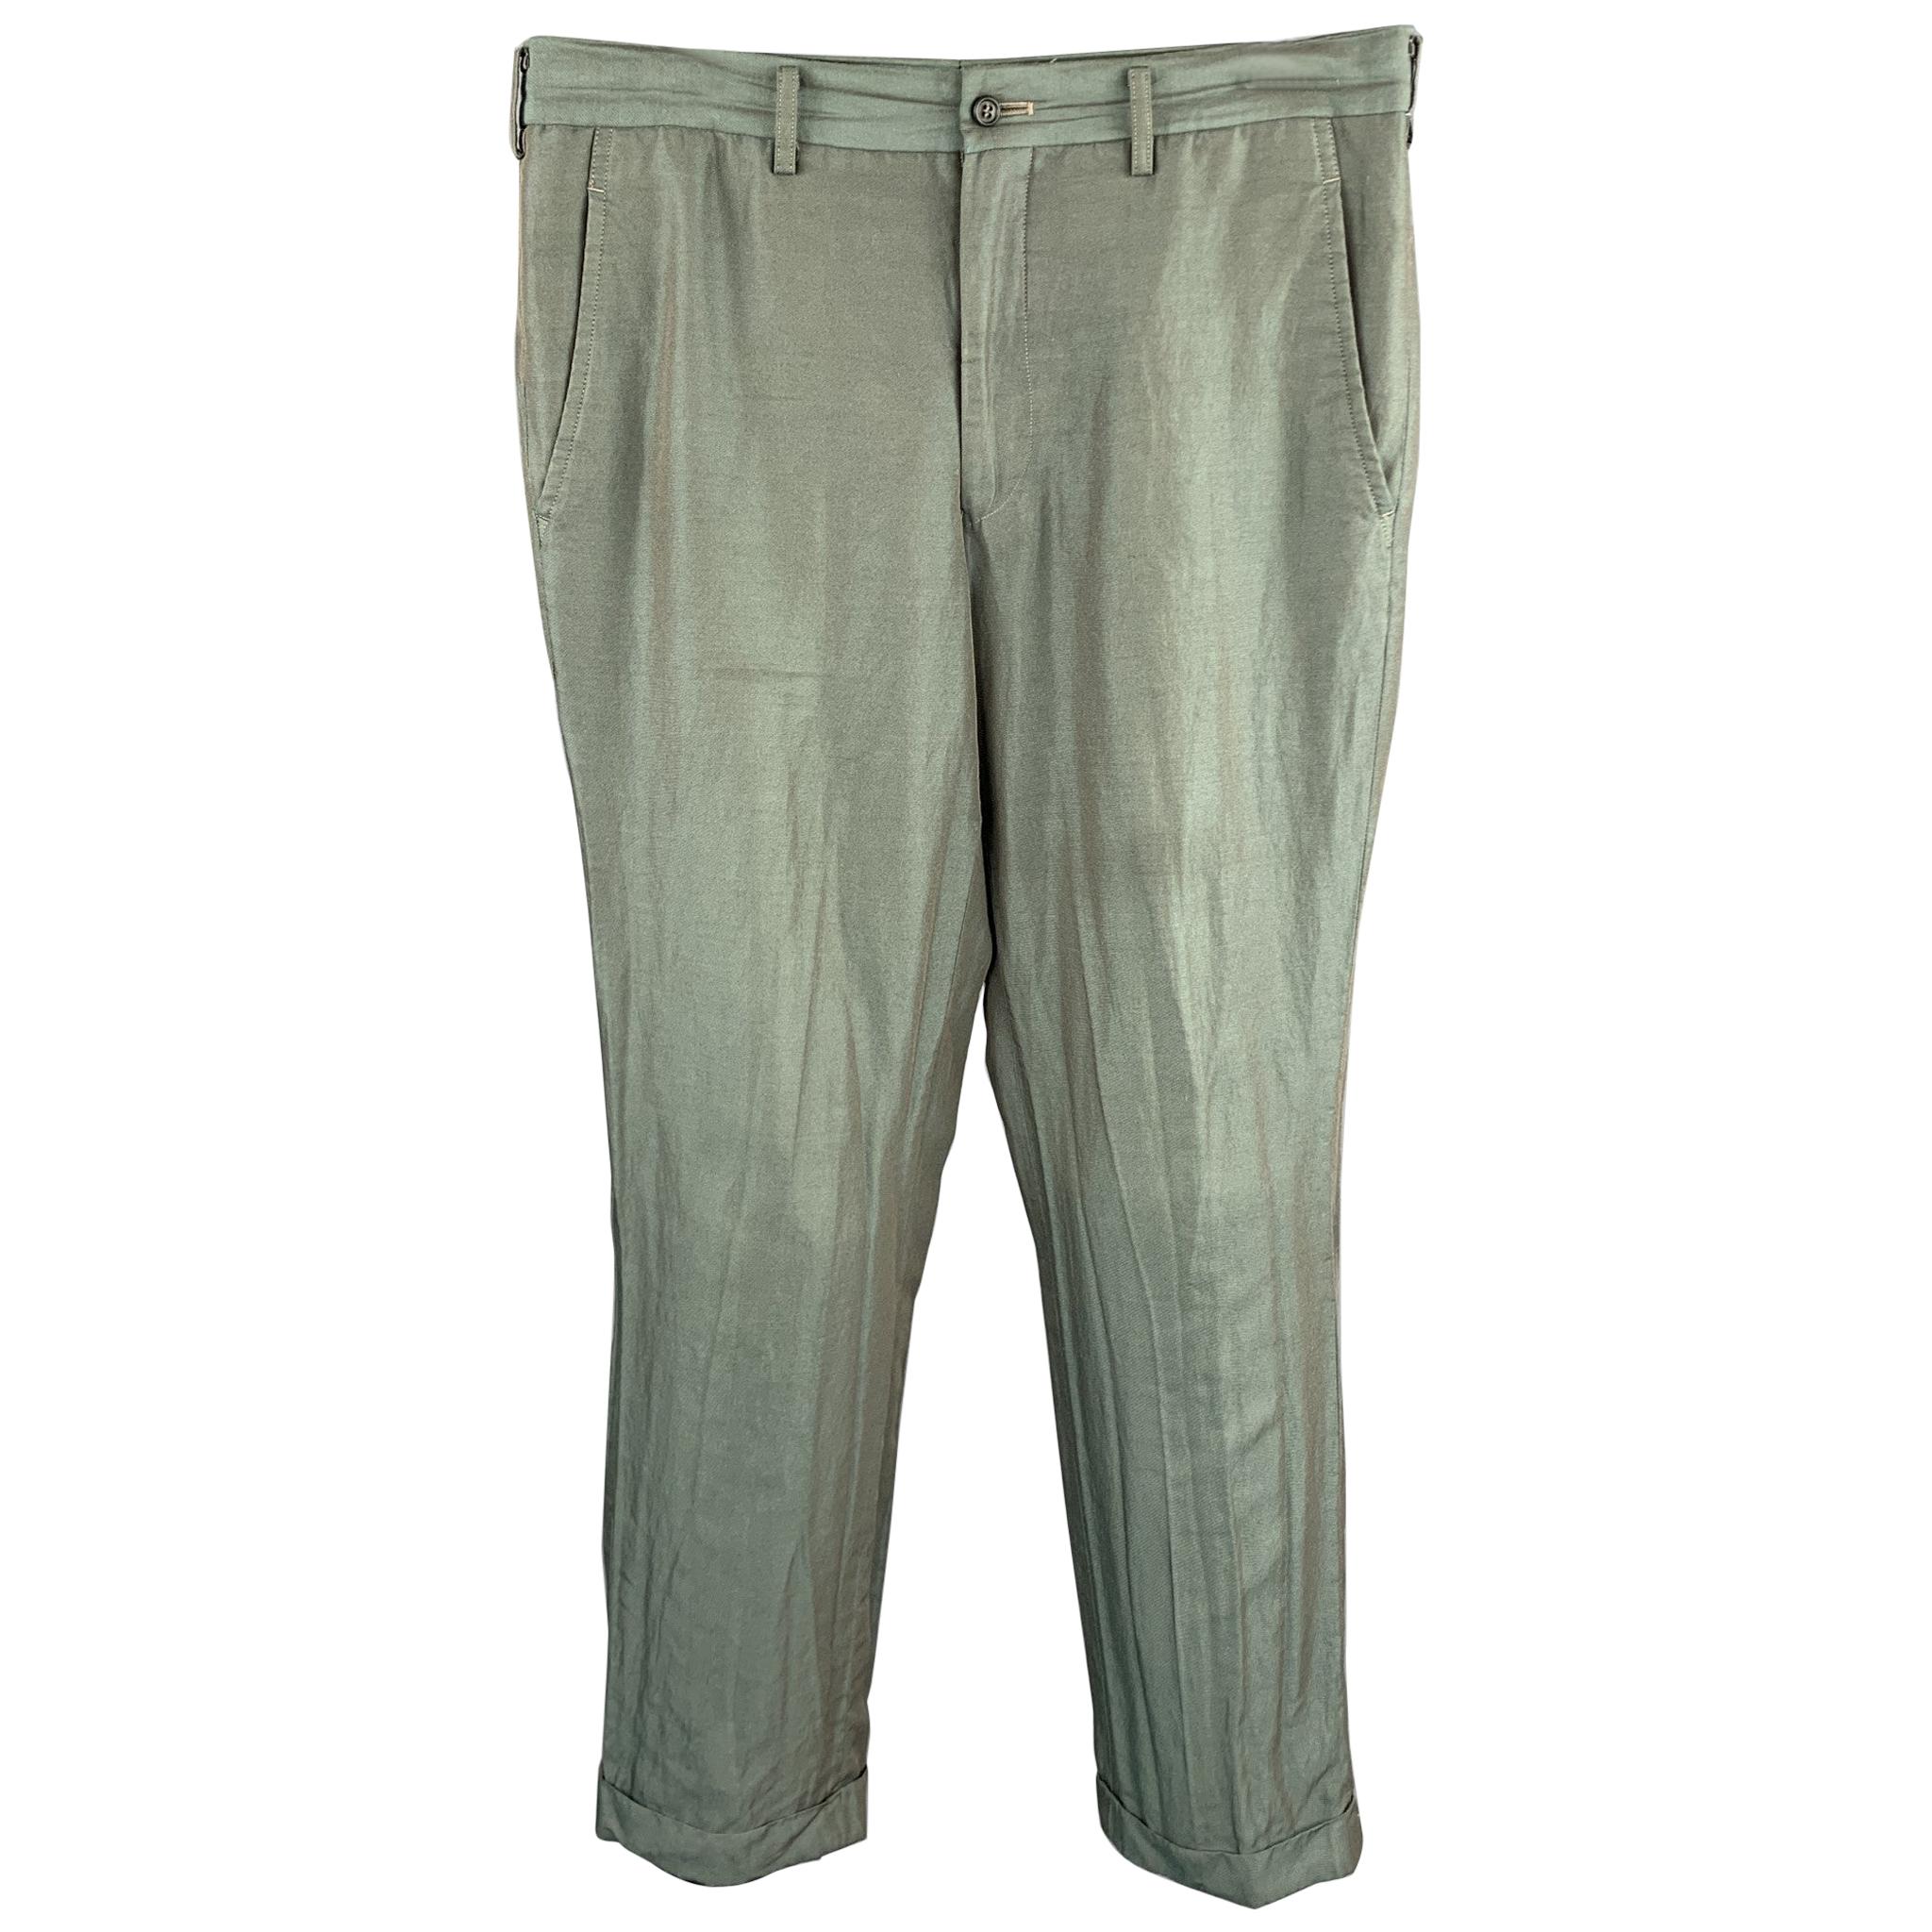 COMME des GARCONS HOMME PLUS Size M Green Two Toned Iridescent Zip Fly Pants